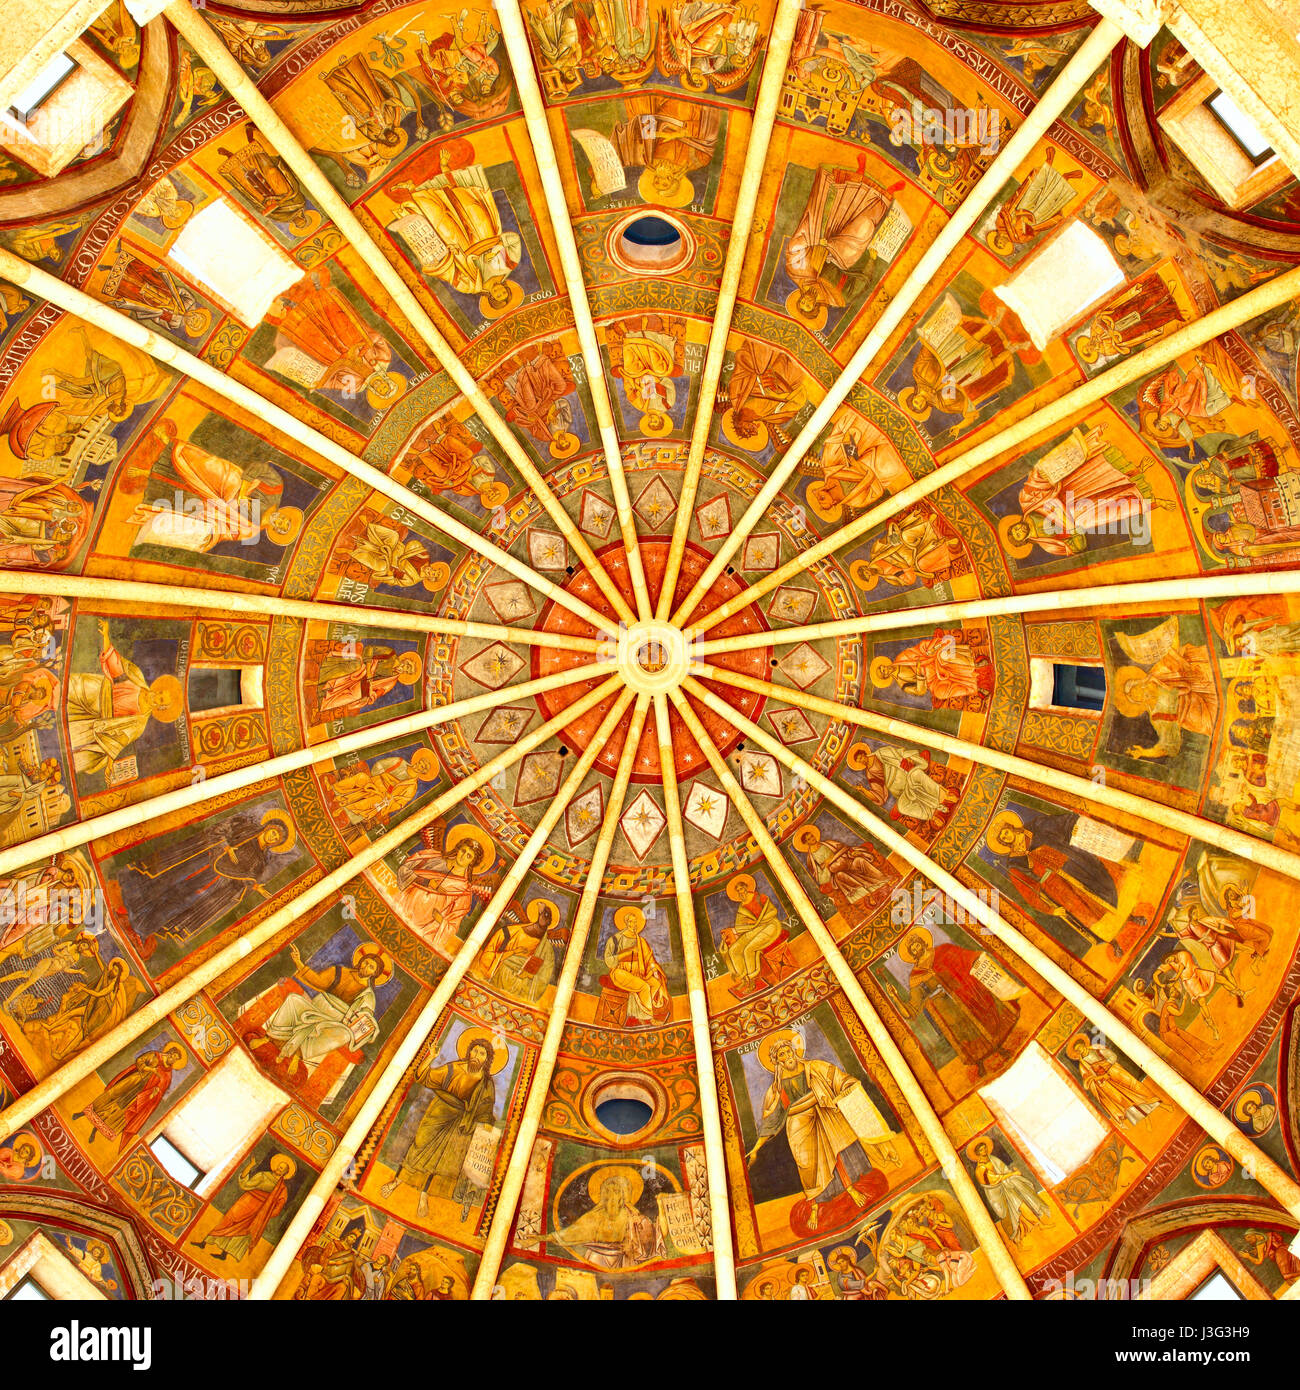 Parma, Italy - October 15, 2016: Ancient ceiling fresco in the Baptistery of Parma Stock Photo